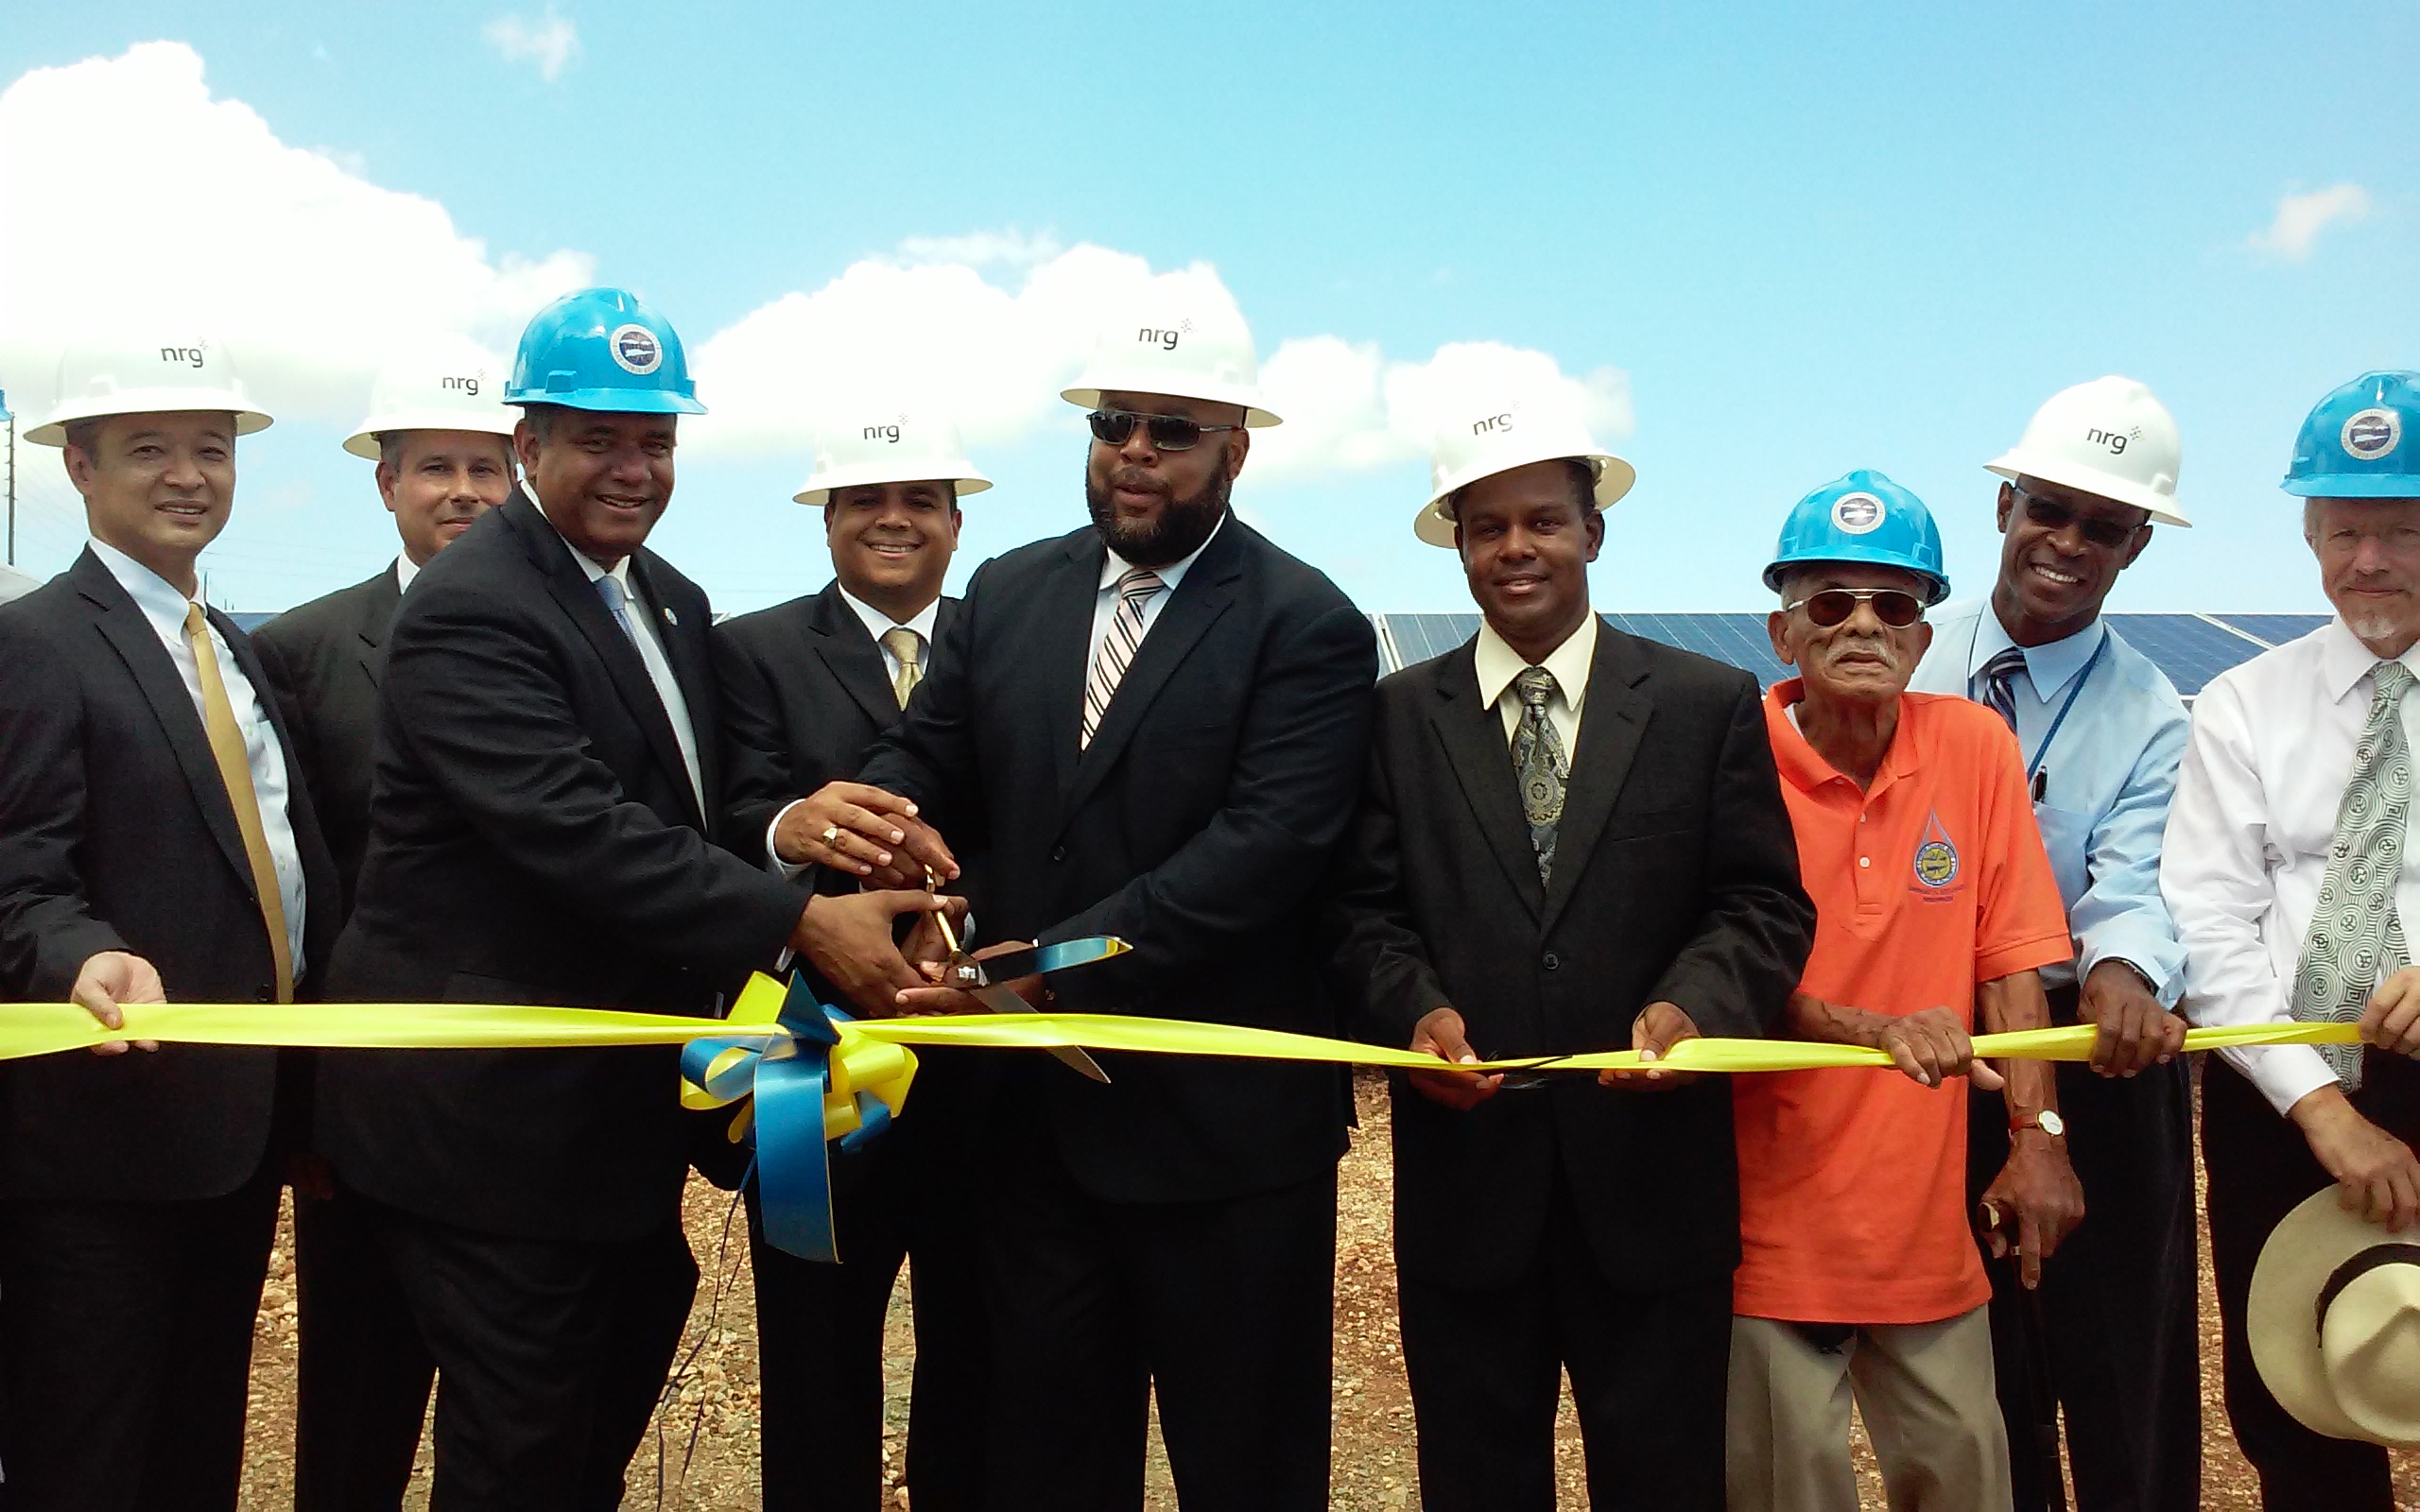 Gov. John deJongh Jr. and WAPA Executie Director Hugo Hodge Jr. and others cut ribbon on solar facility in Spanish Town Monday